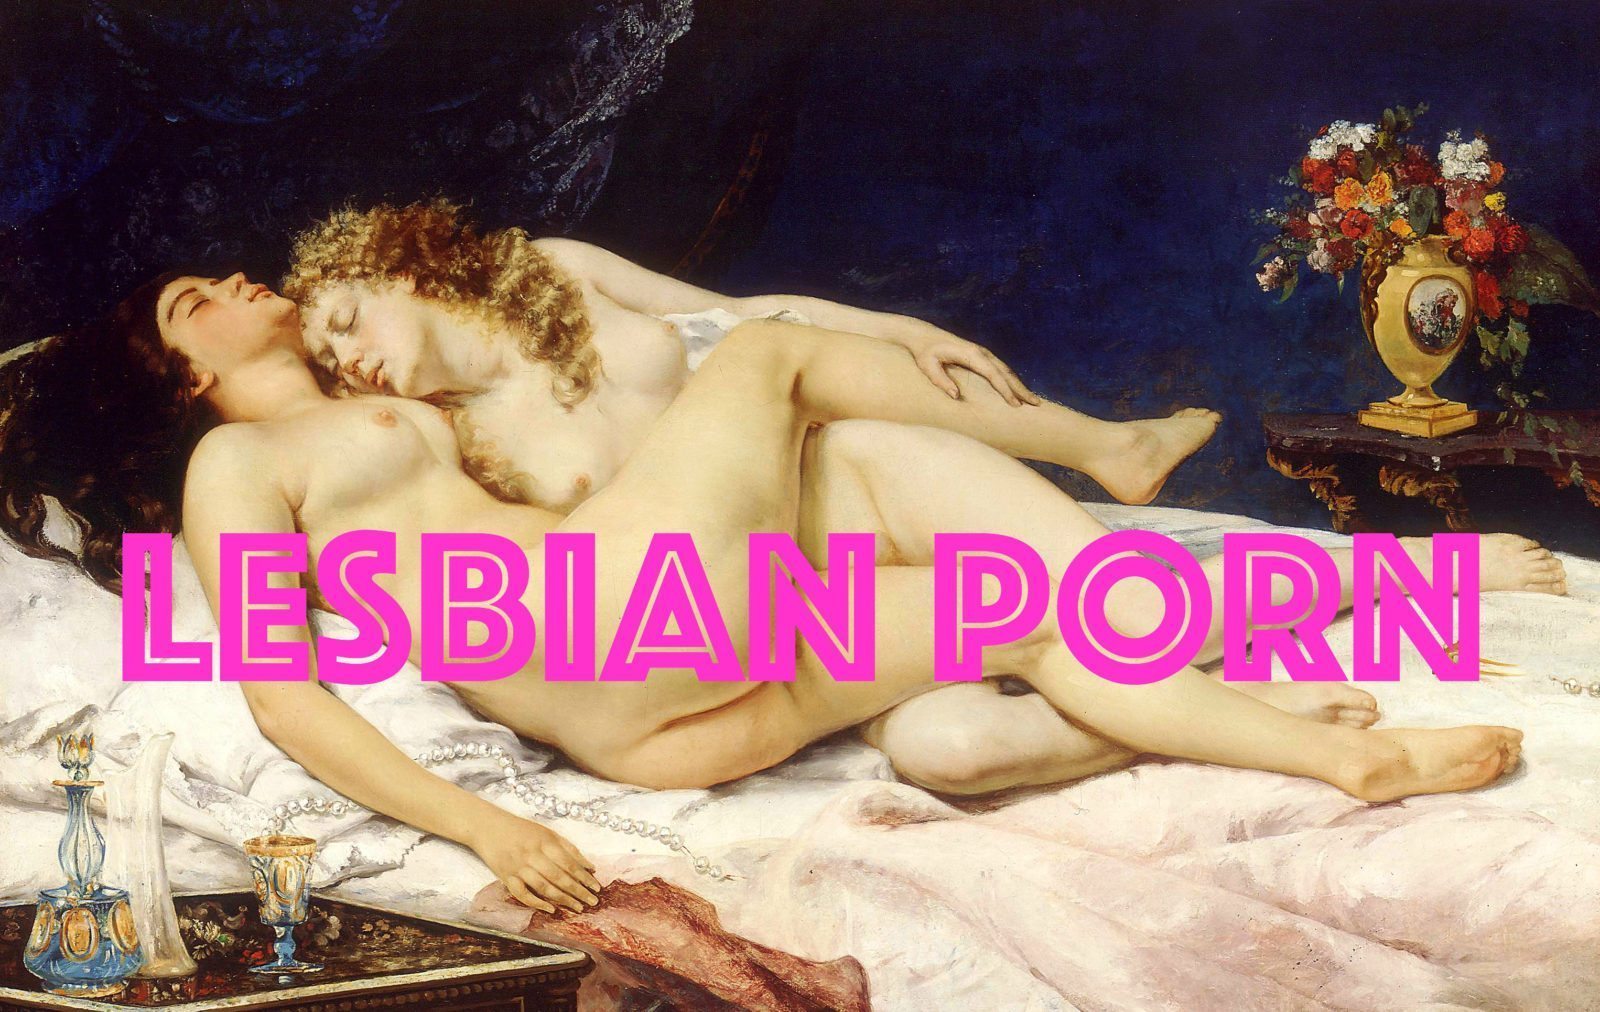 Heres all the hottest lesbian porn that requires your attention Page 2 of 2 PinkNews